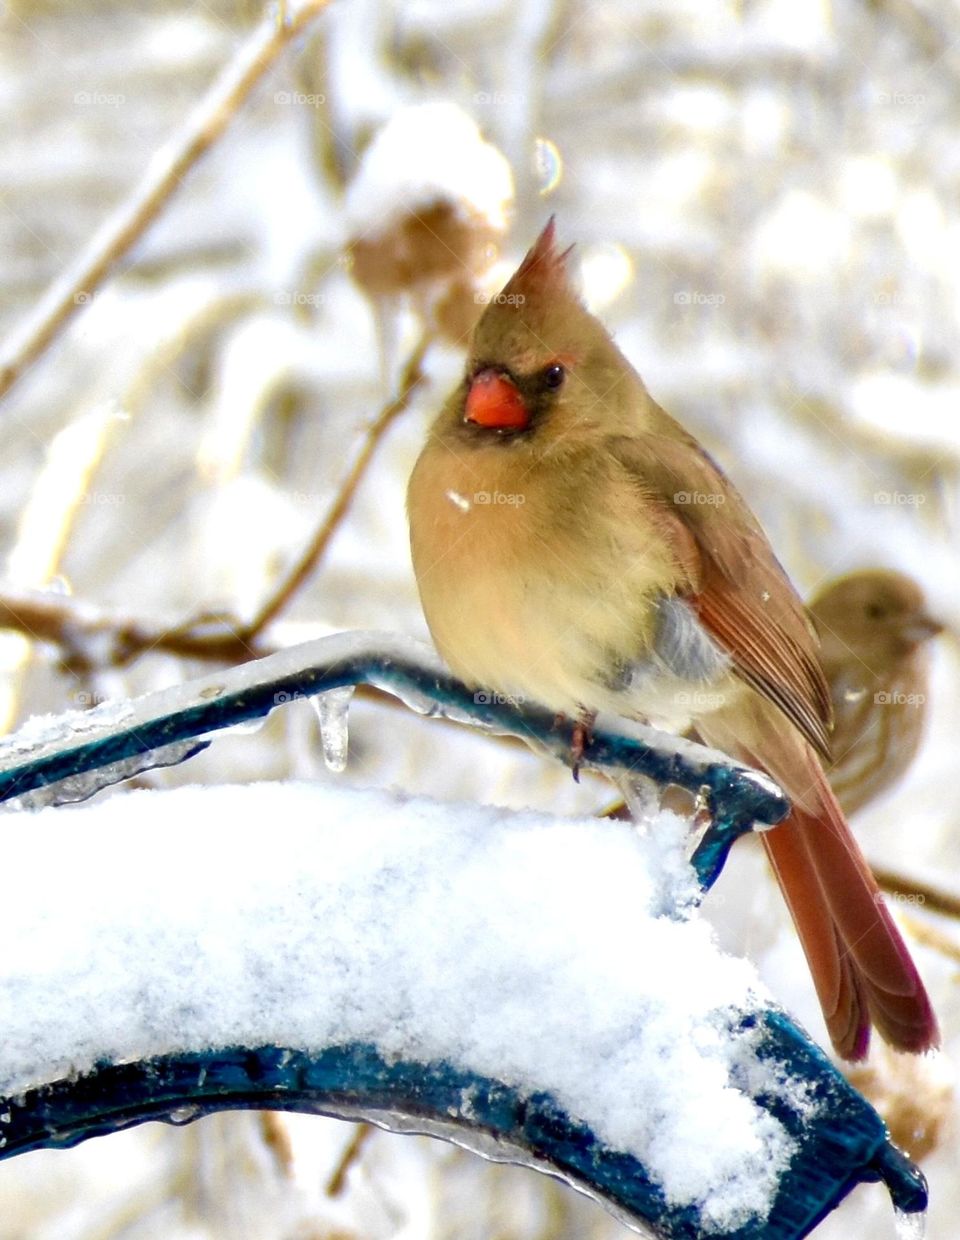 Female northern cardinal in the snow